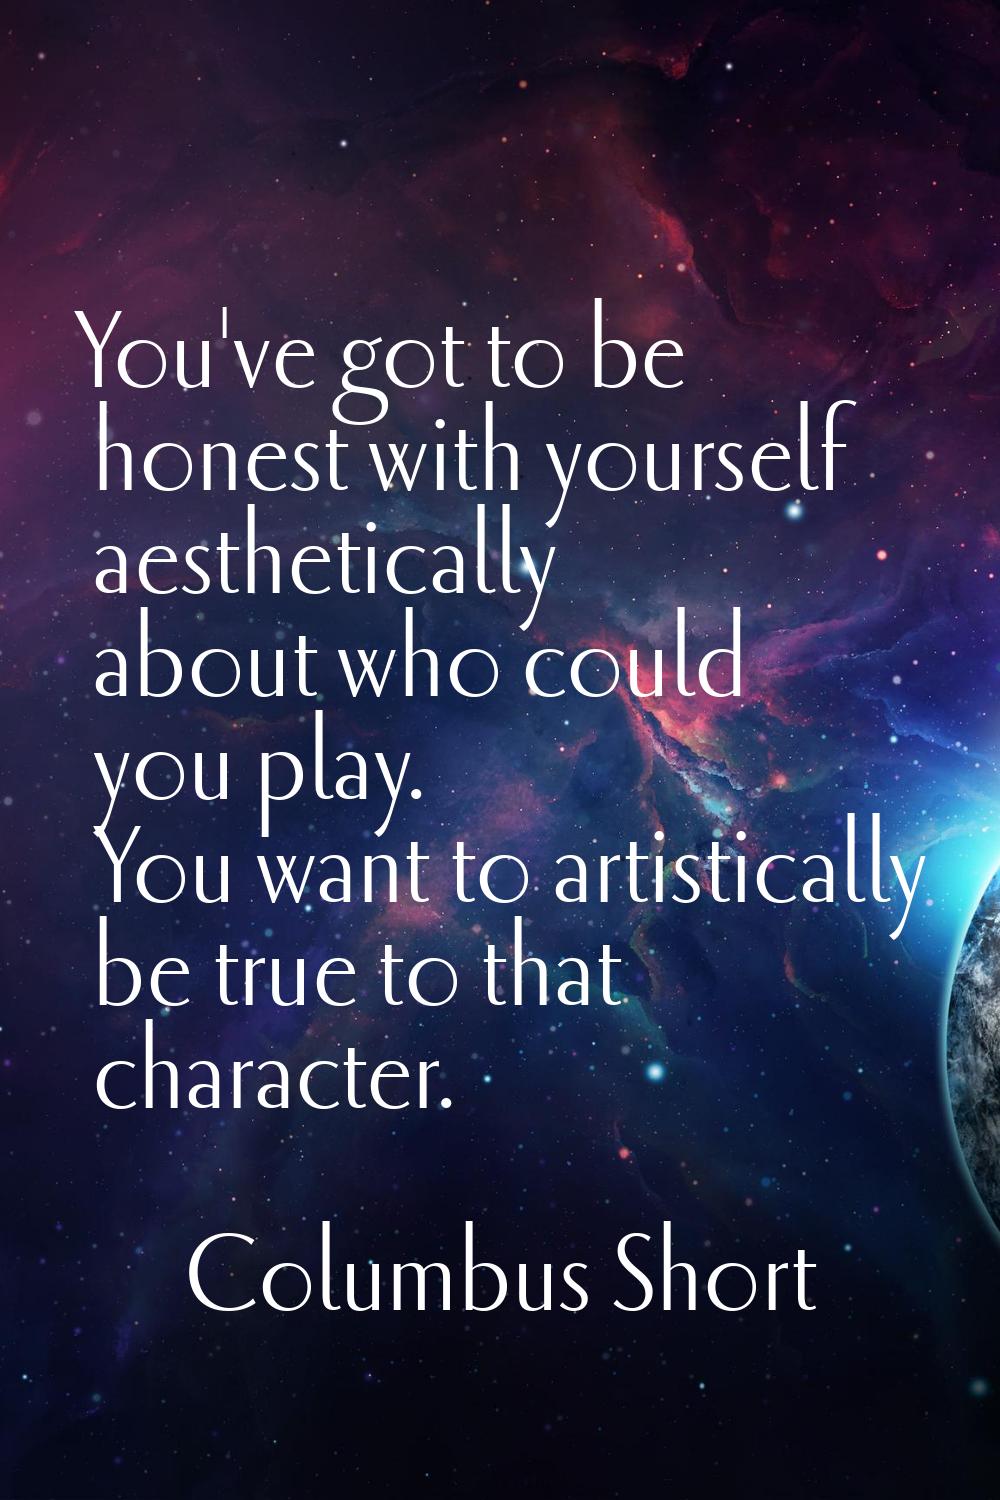 You've got to be honest with yourself aesthetically about who could you play. You want to artistica